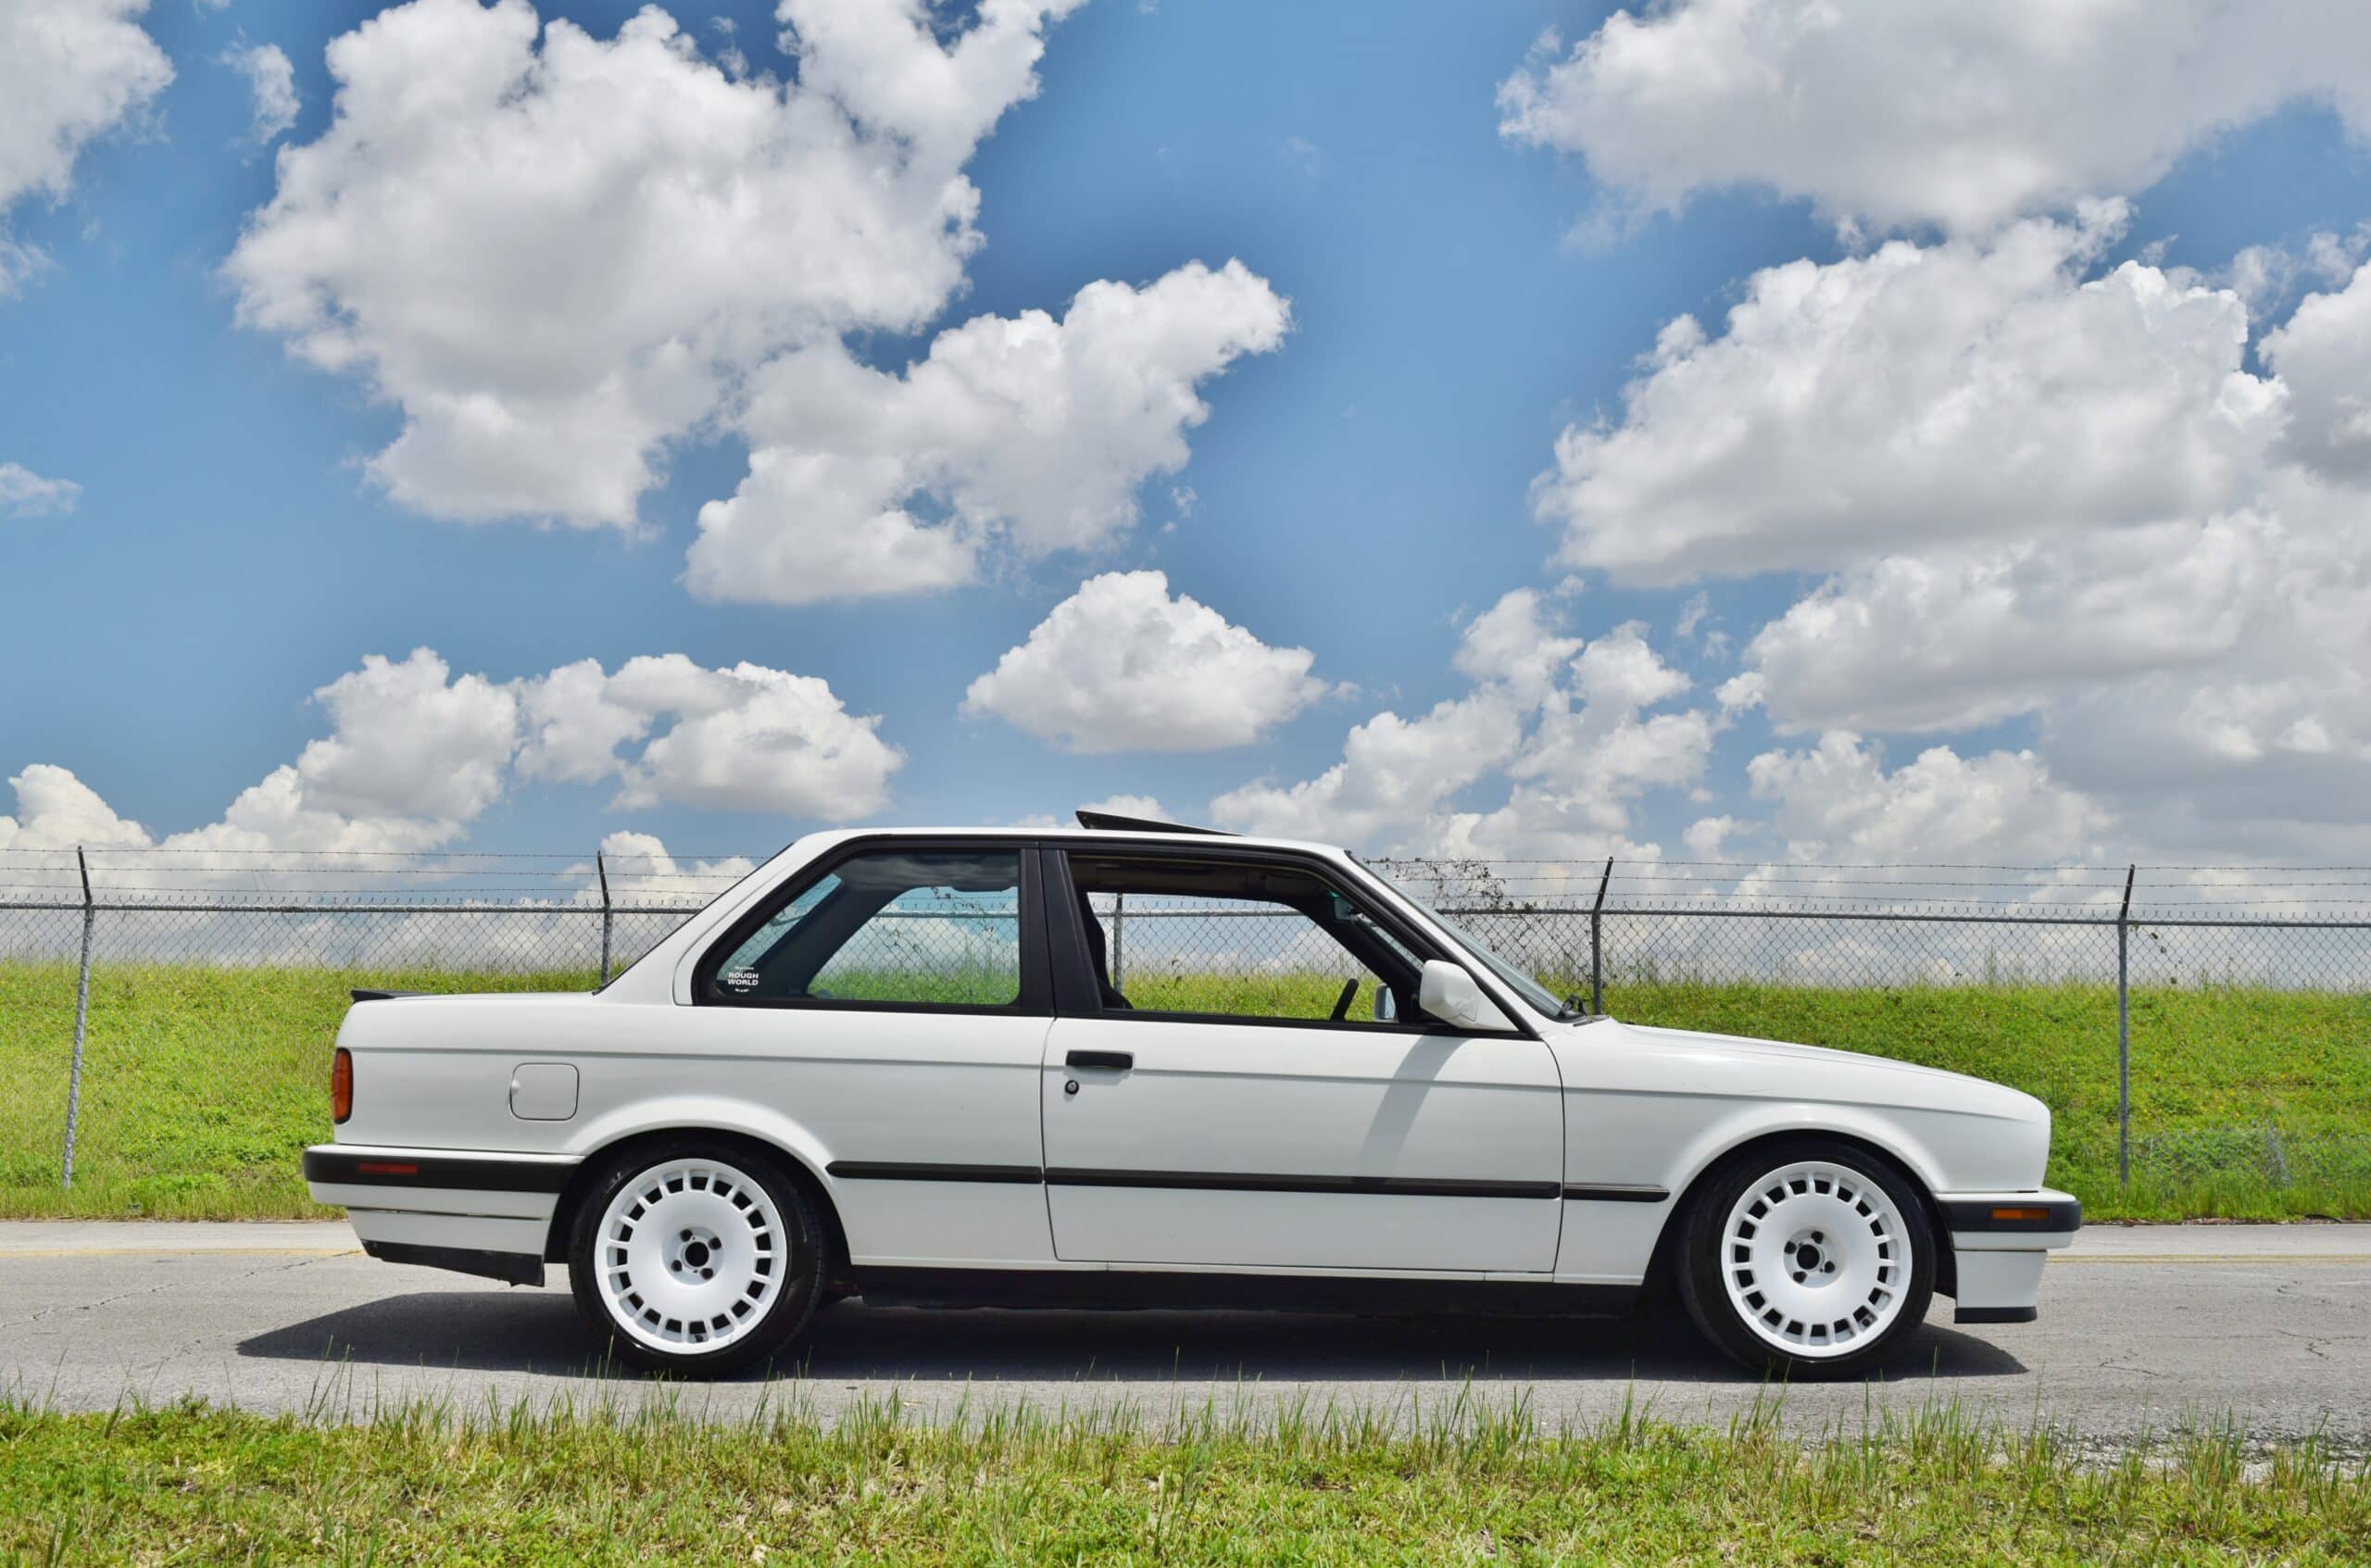 1991 BMW 3-Series E30 318IS -S50 Swap- Recaro Seats – 5 Speed Manual – Well Sorted – Excellent Driver